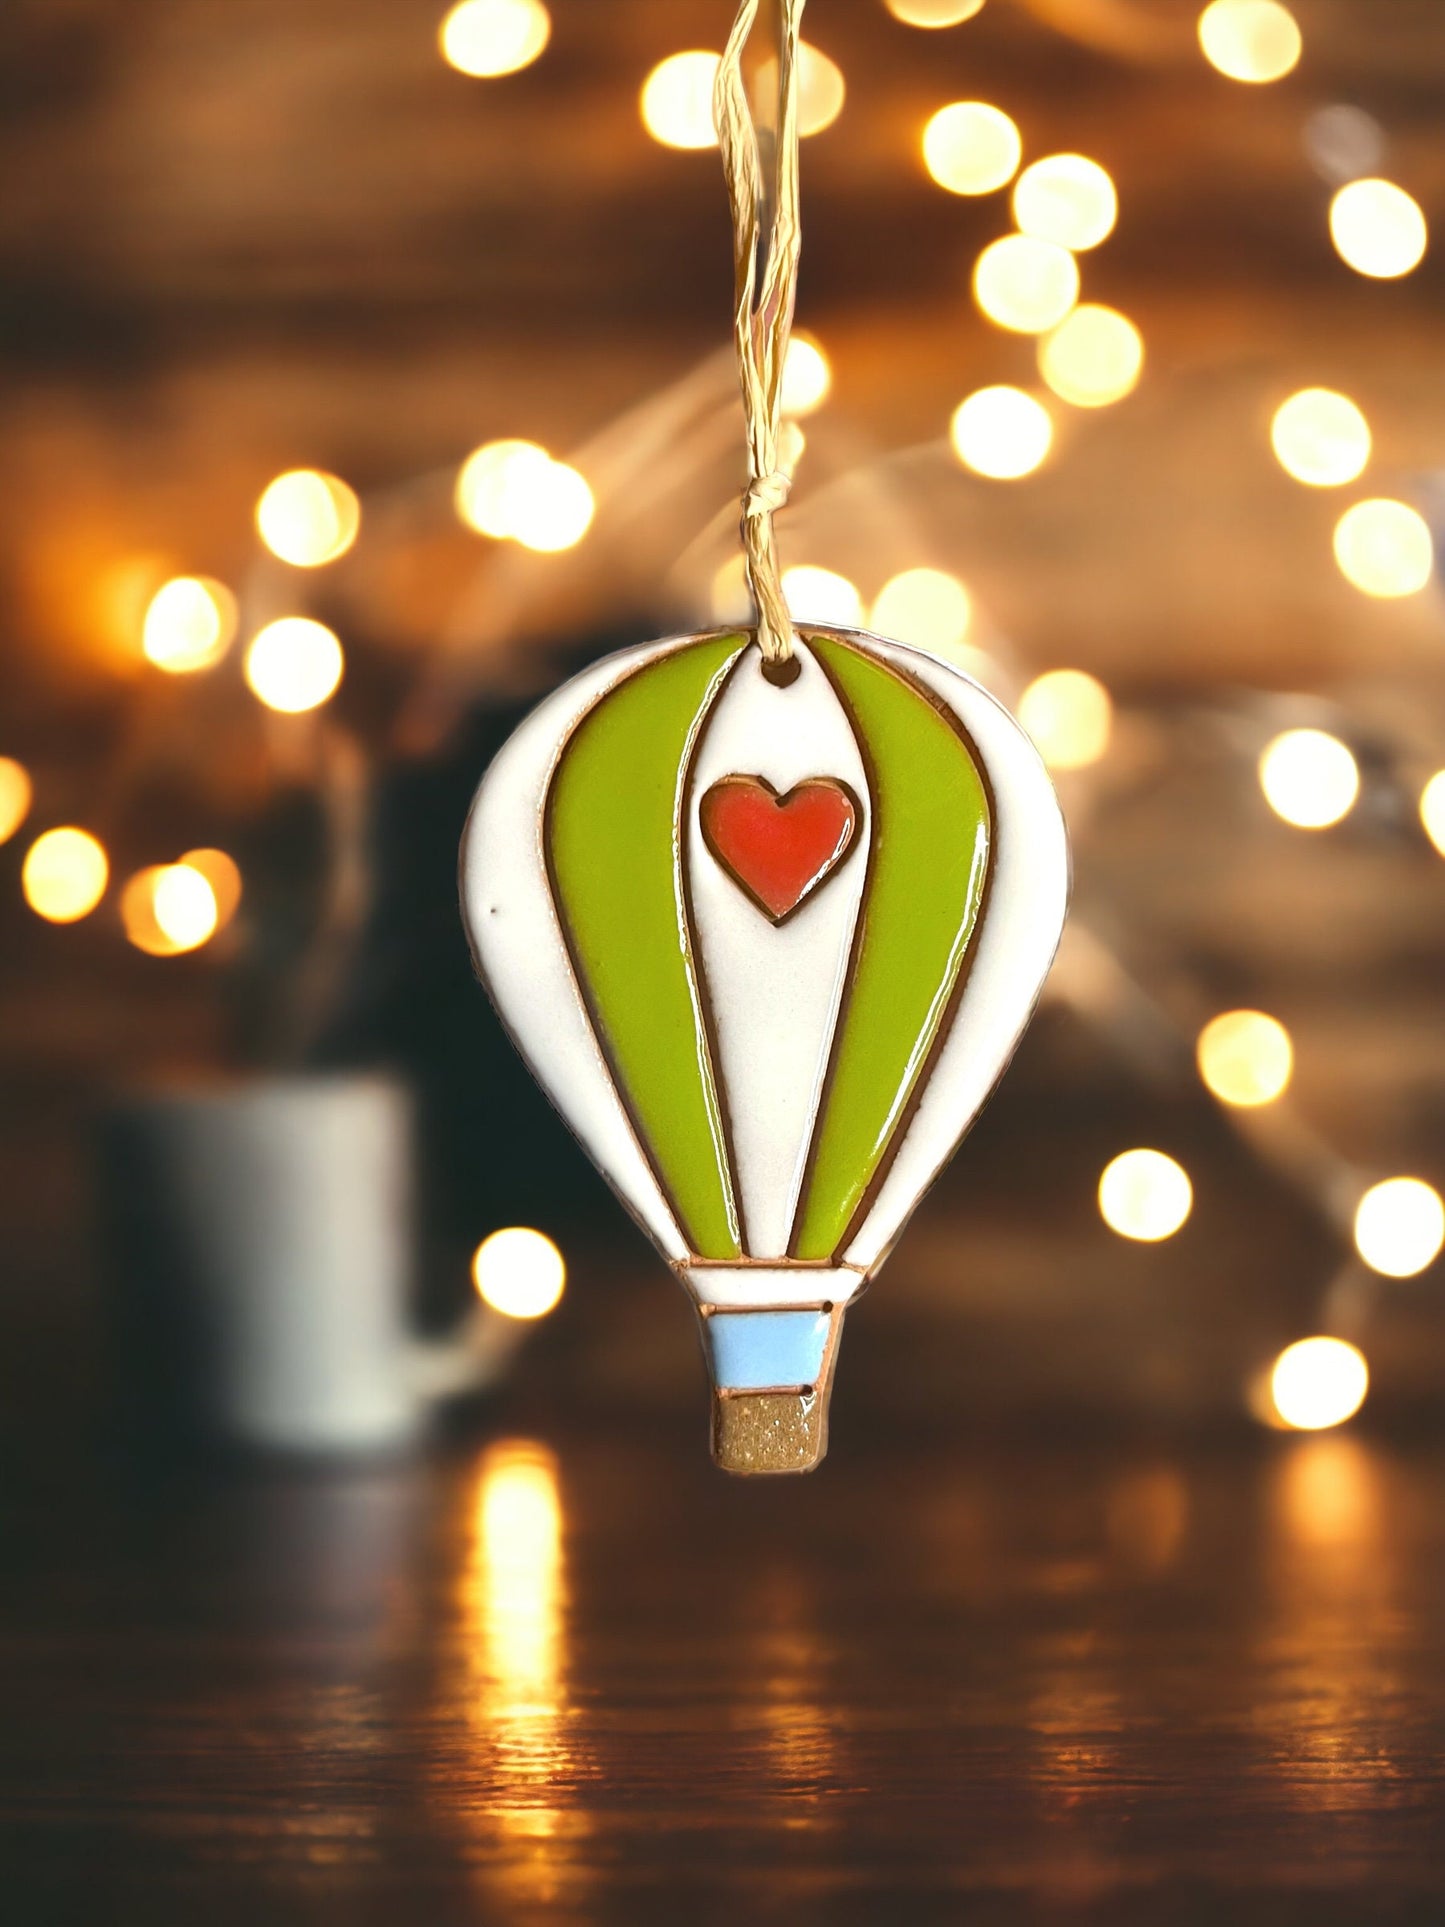 Hearts and Stripes Hot Air Balloon Ornament (color variations)